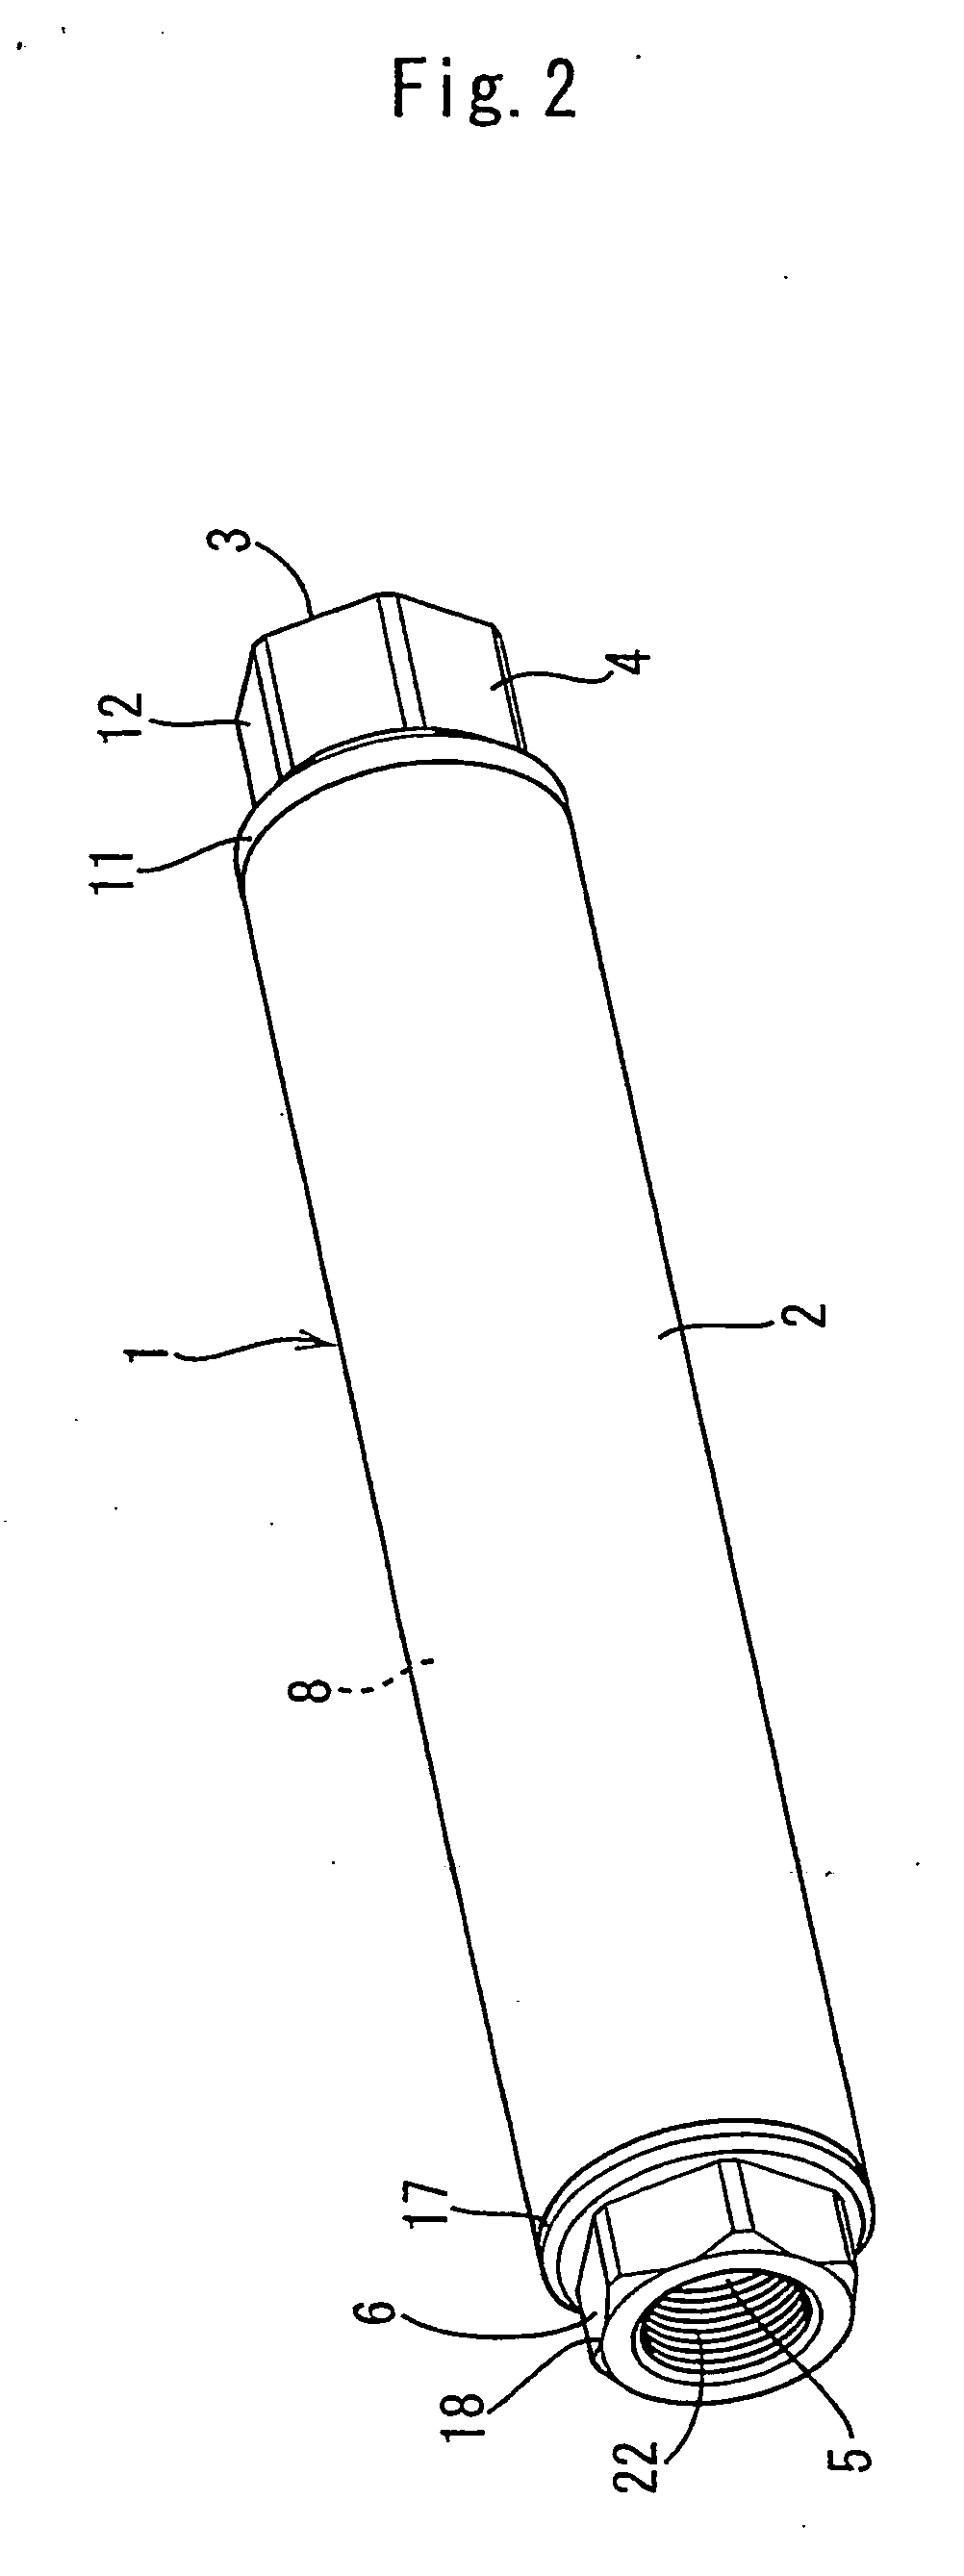 Fluid delivery tube structural body